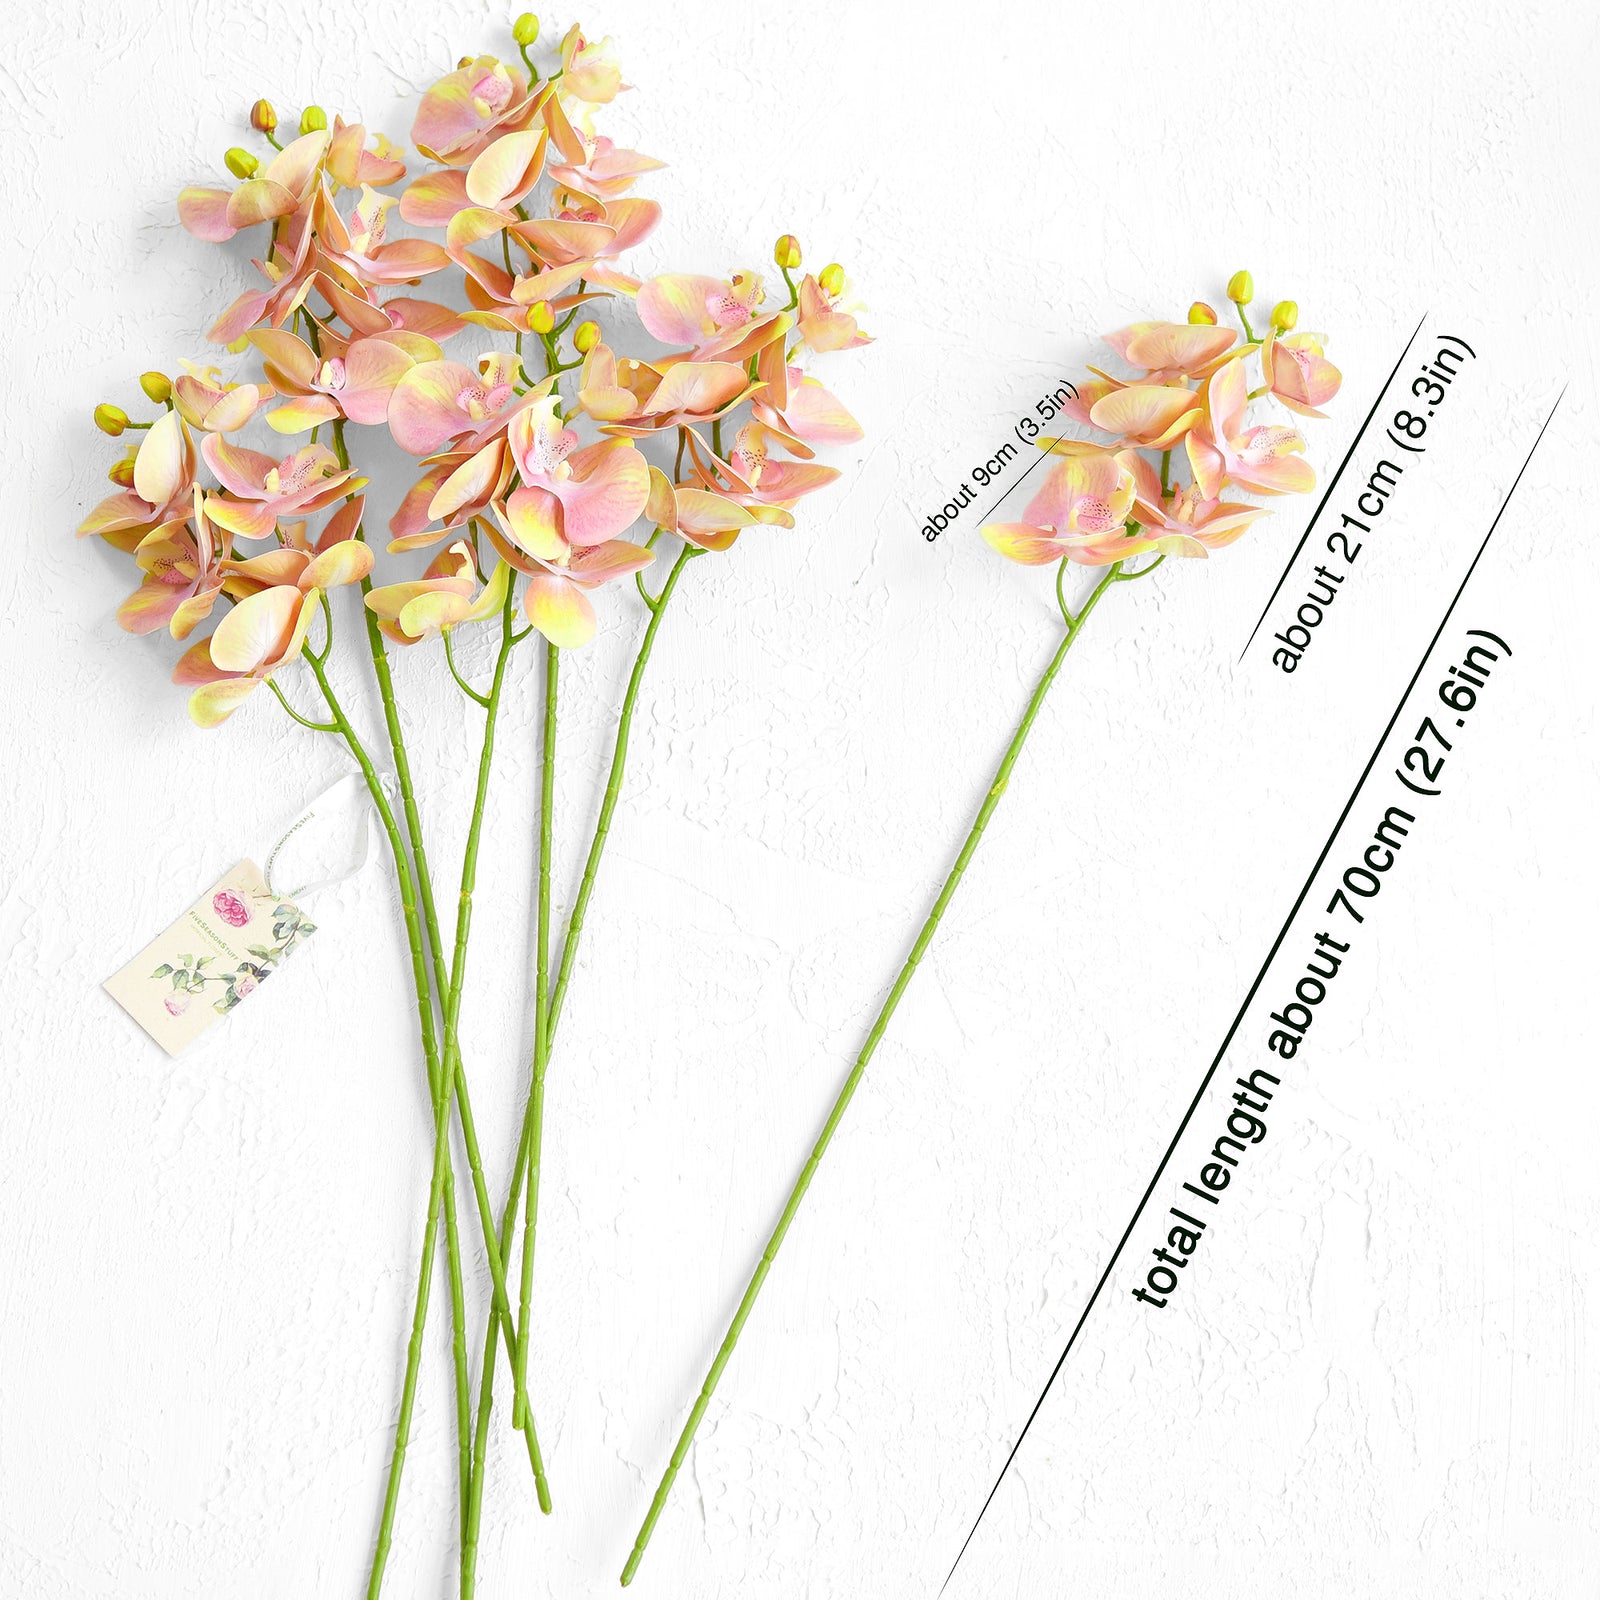 Lemon Pink 2 Stems Real Touch Artificial Butterfly Orchids/Moth Orchid/Phalaenopsis Flowers 27.6" Tall 70cm